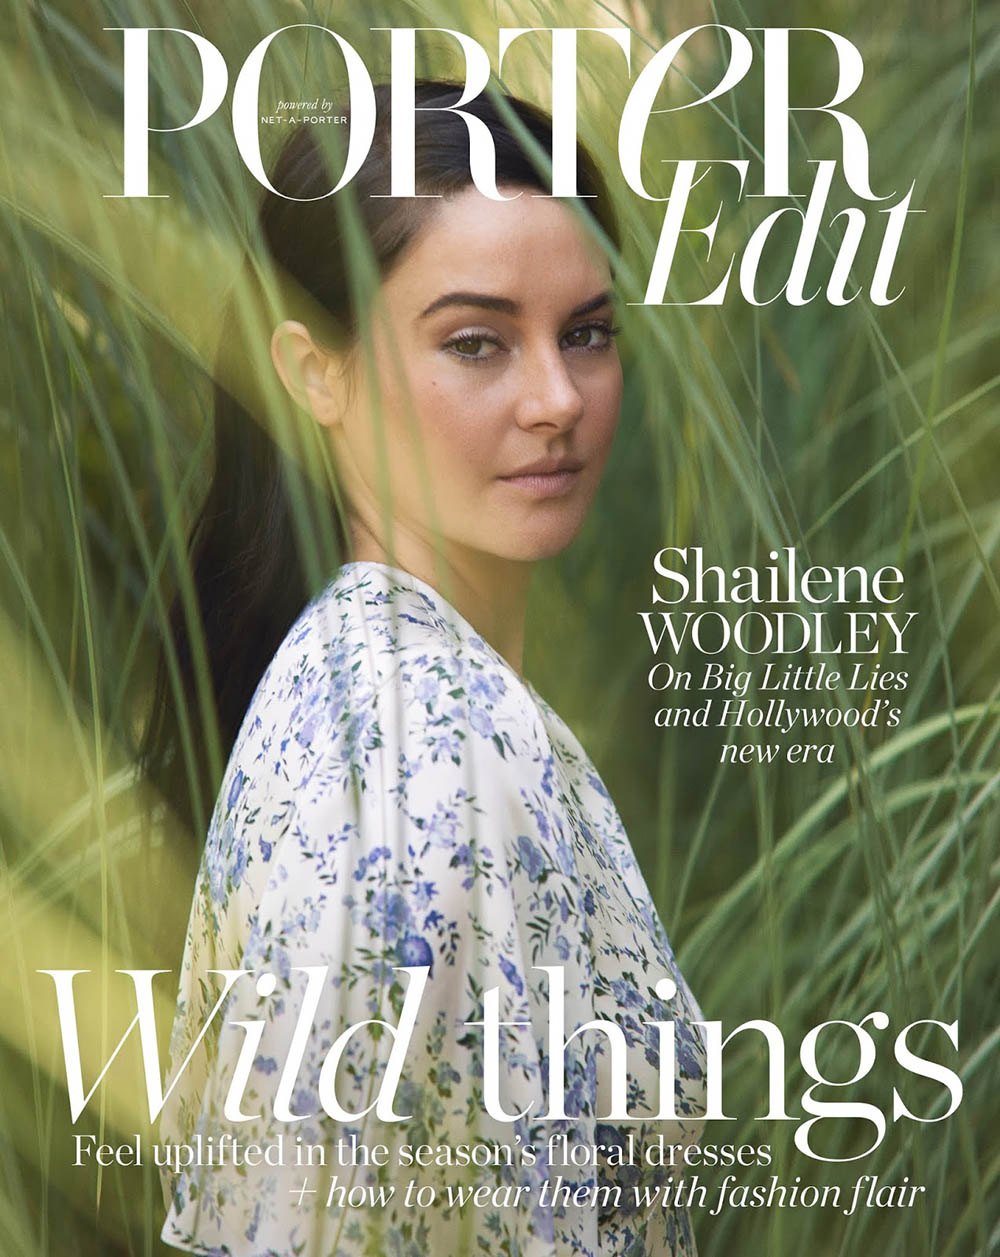 Shailene Woodley covers Porter Edit June 1st, 2018 by Matthew Sprout